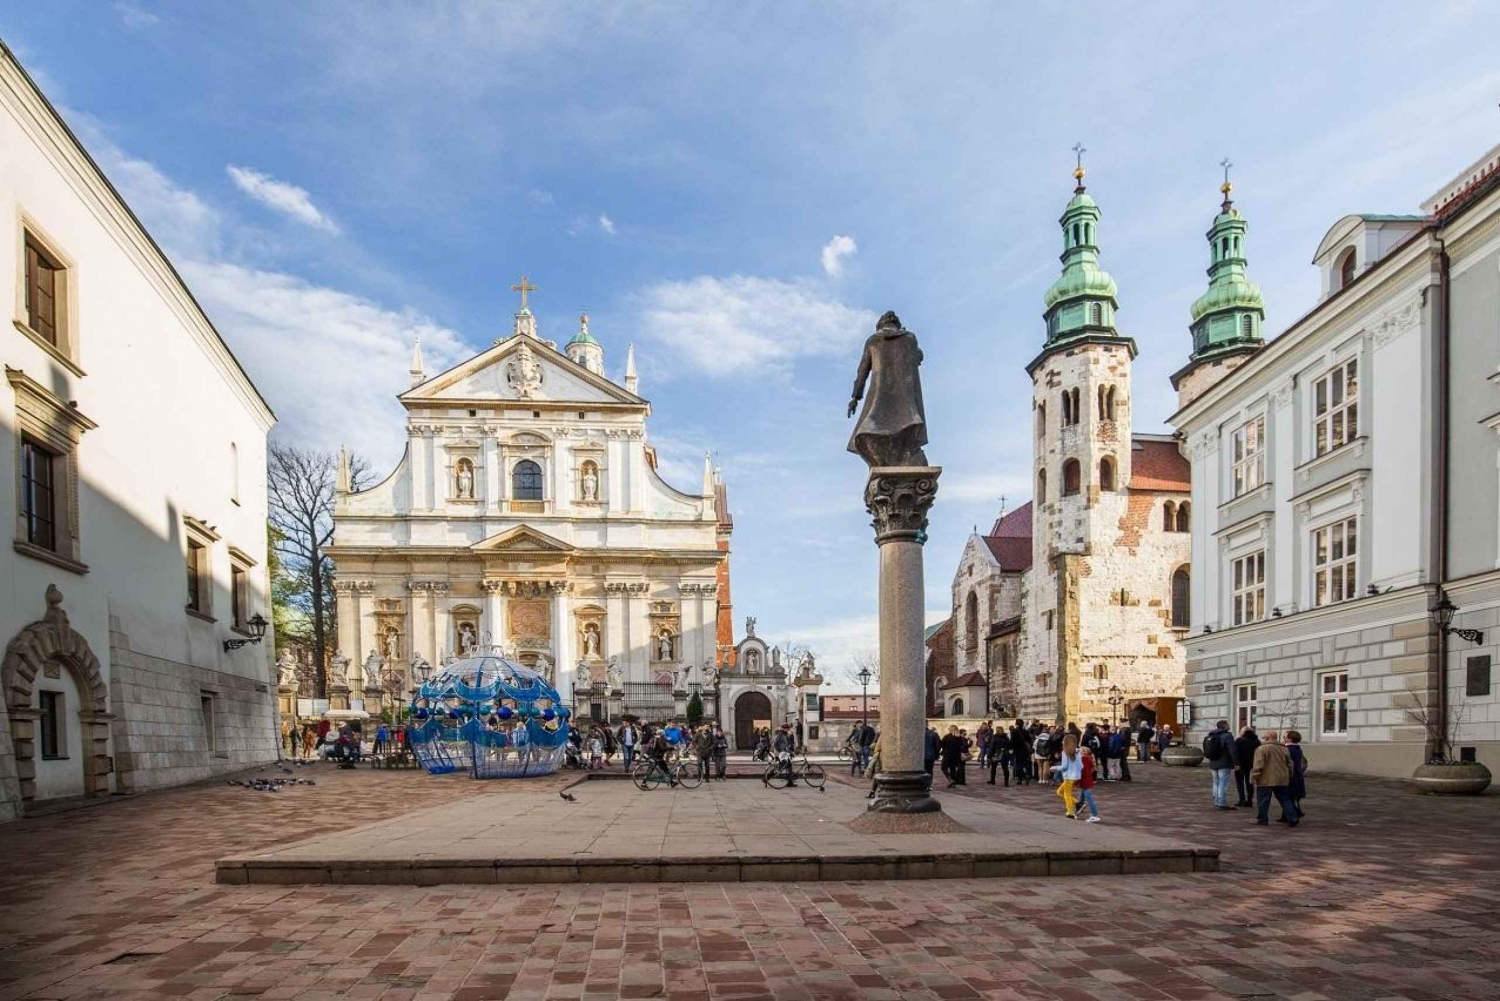 Krakow: Wawel Castle & Cathedral, Old Town & City Basilica